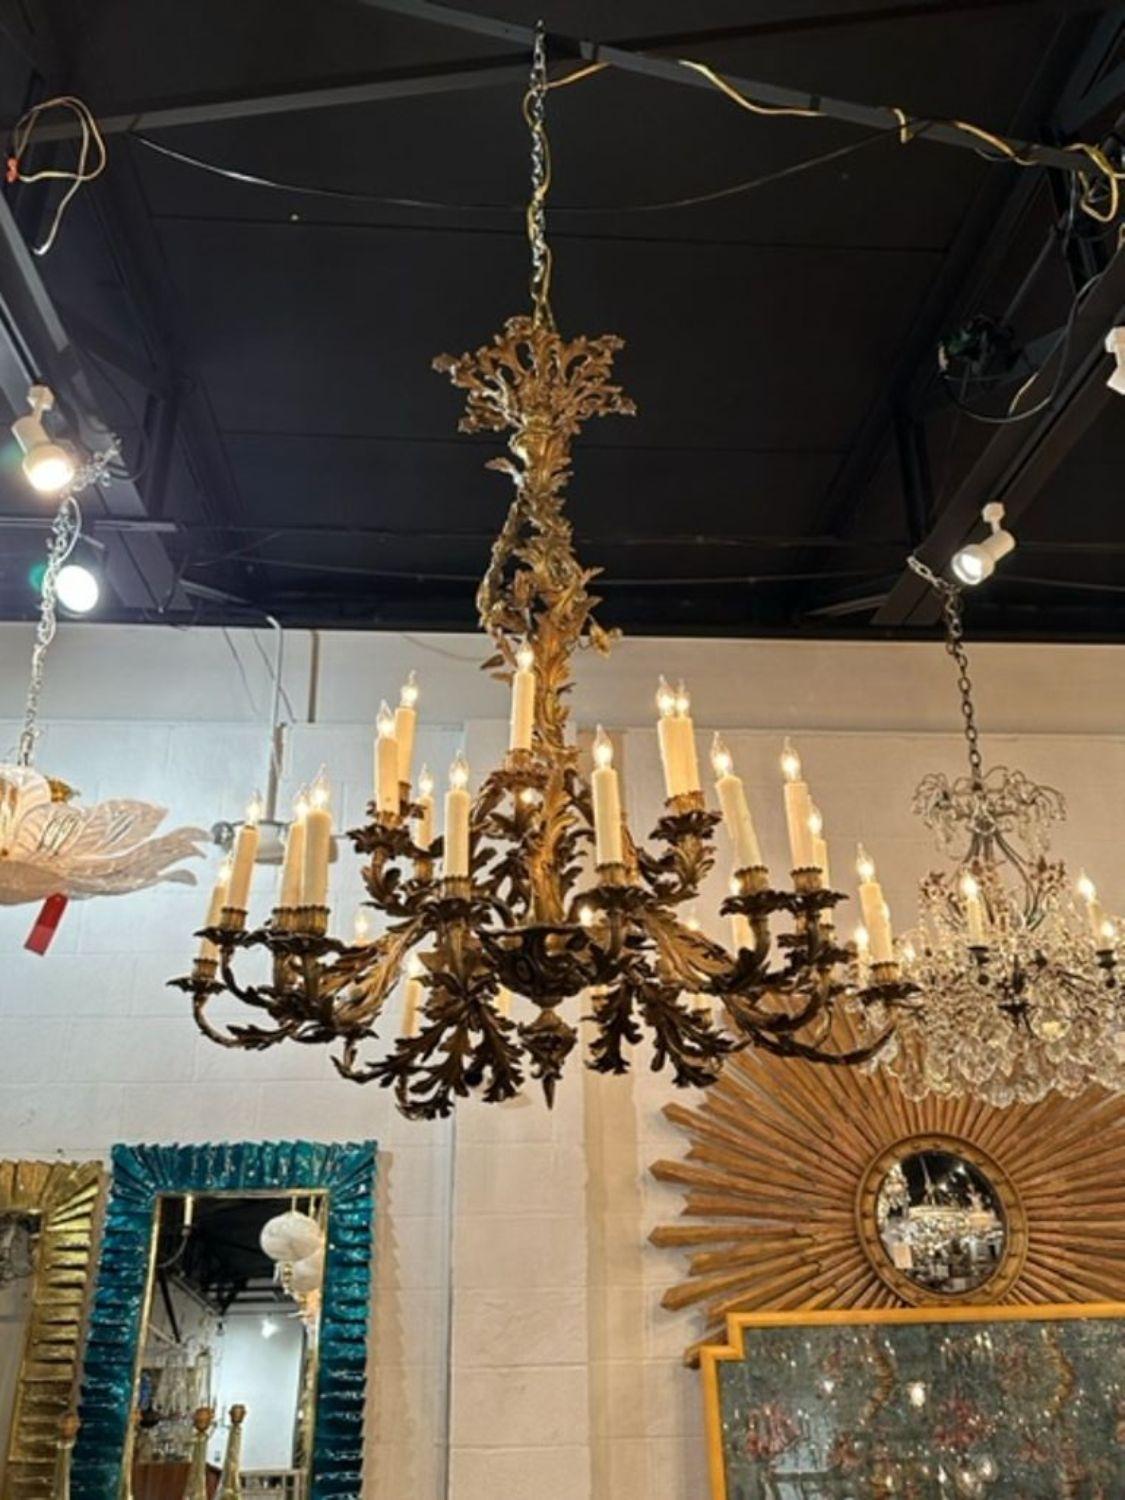 Fine 19th century French Rococo gilt bronze 28-light chandelier, circa 1870. The chandelier has been professionally rewired, comes with matching chain and canopy. It is ready to hang!